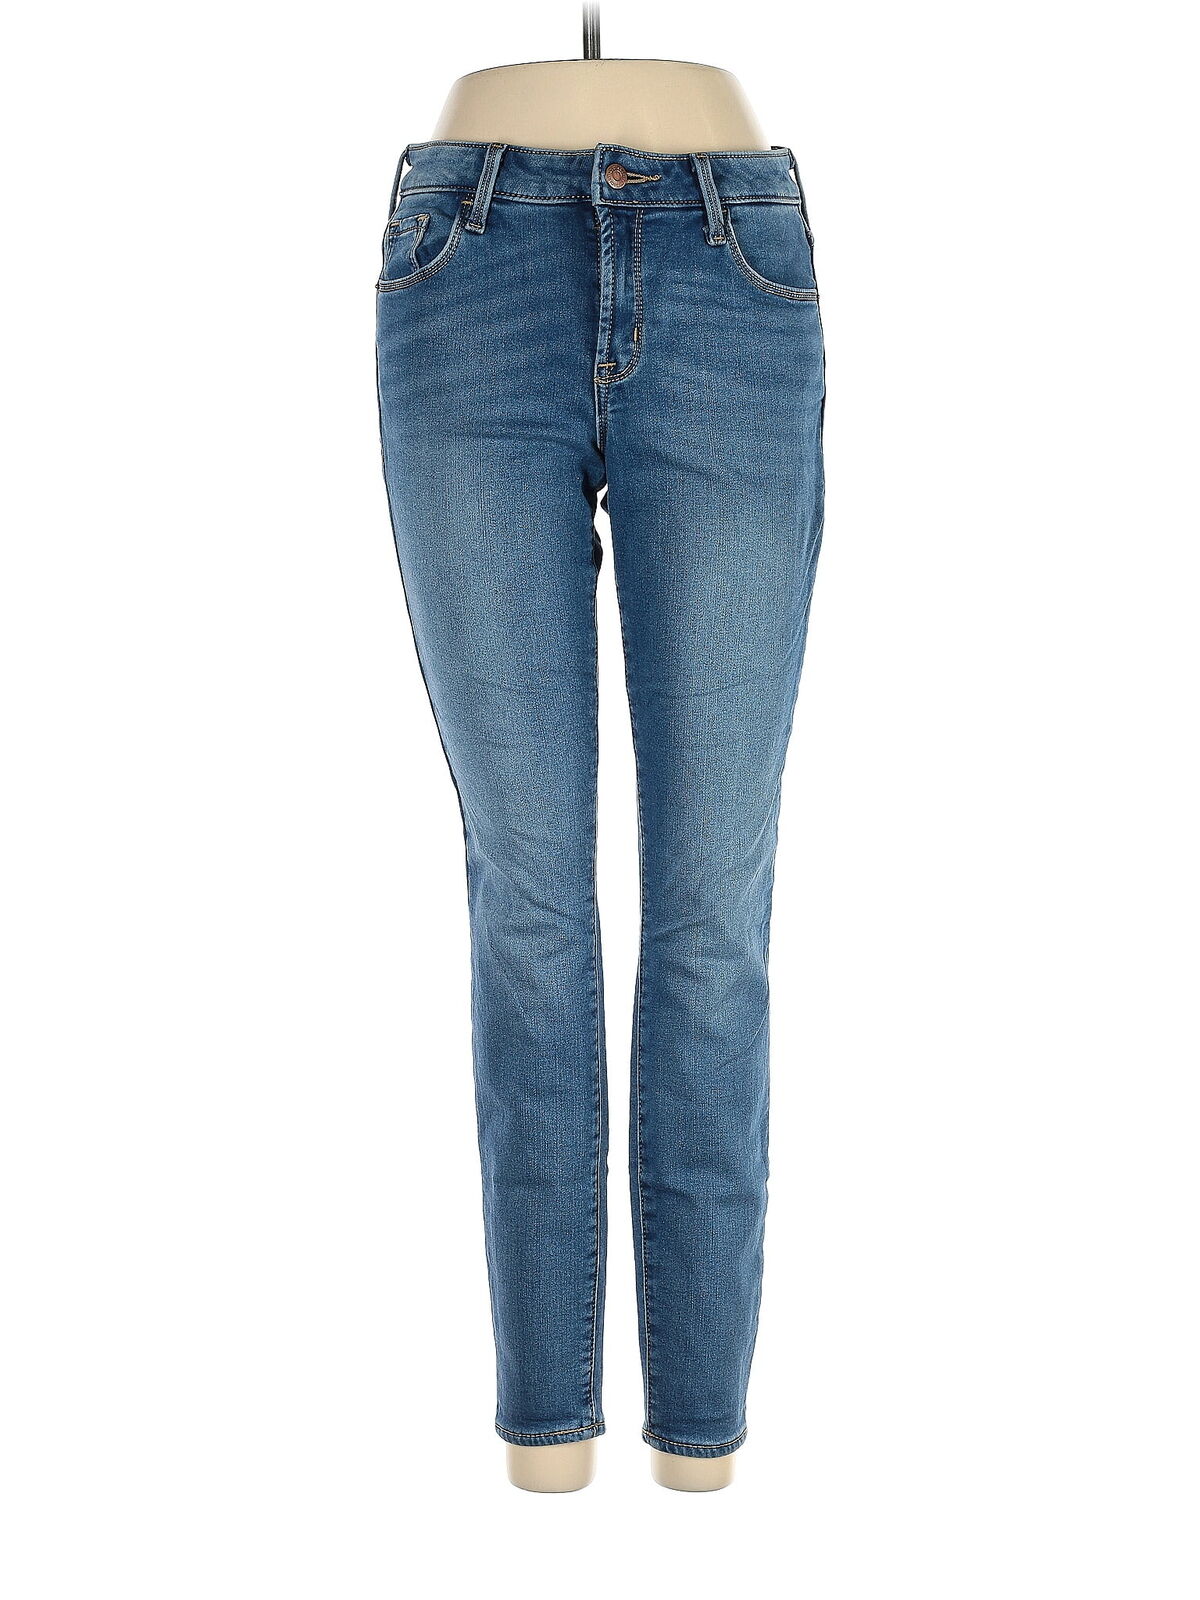 Old Navy Women Blue Jeans 4 - image 1